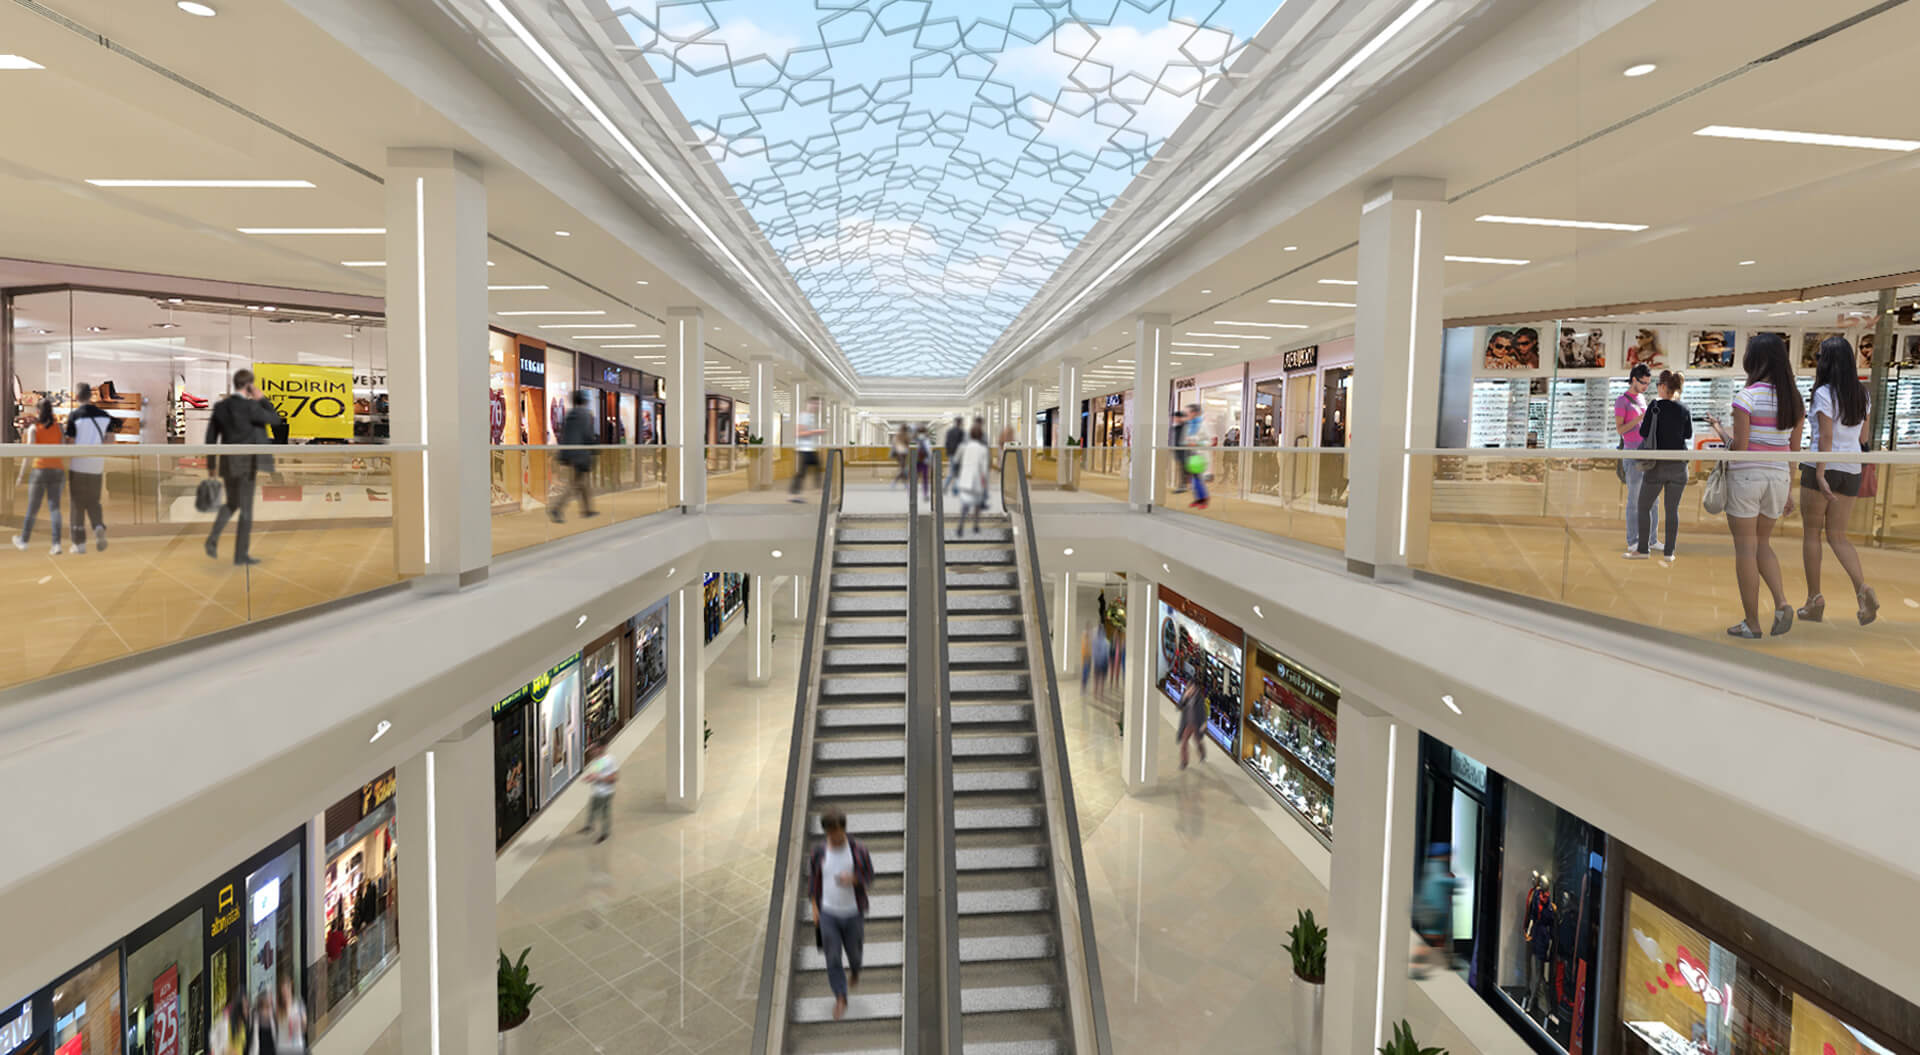 Icerenkoy shopping mall Istanbul interior design escalator circulation and geodesic glazed roof design